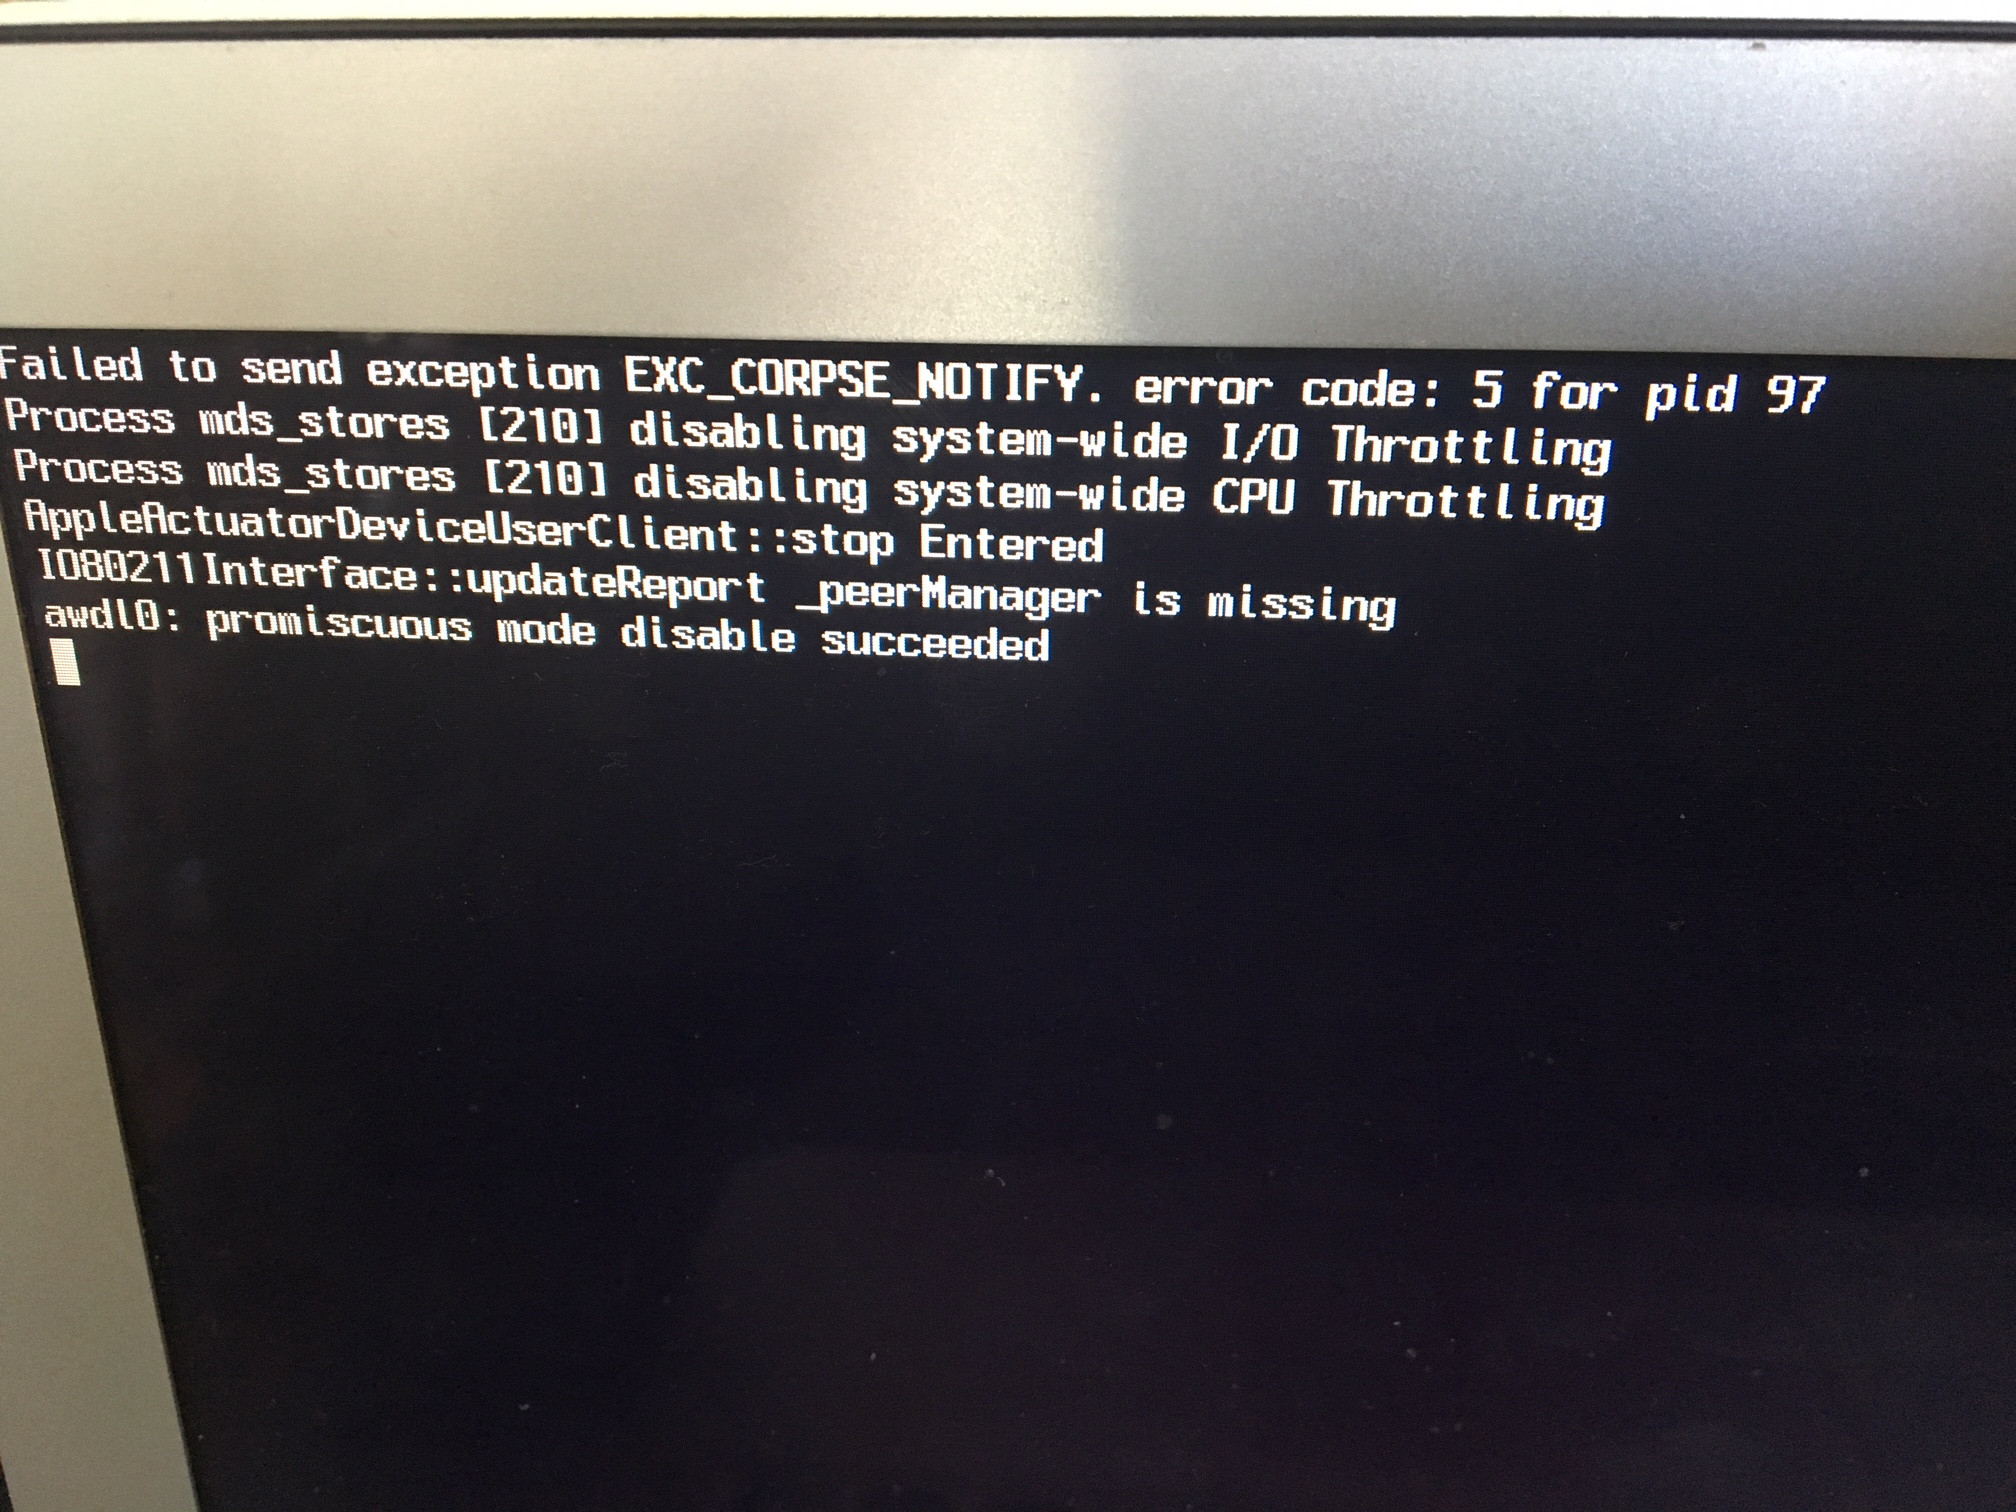 hackintosh failed to send exception exc corpse notify